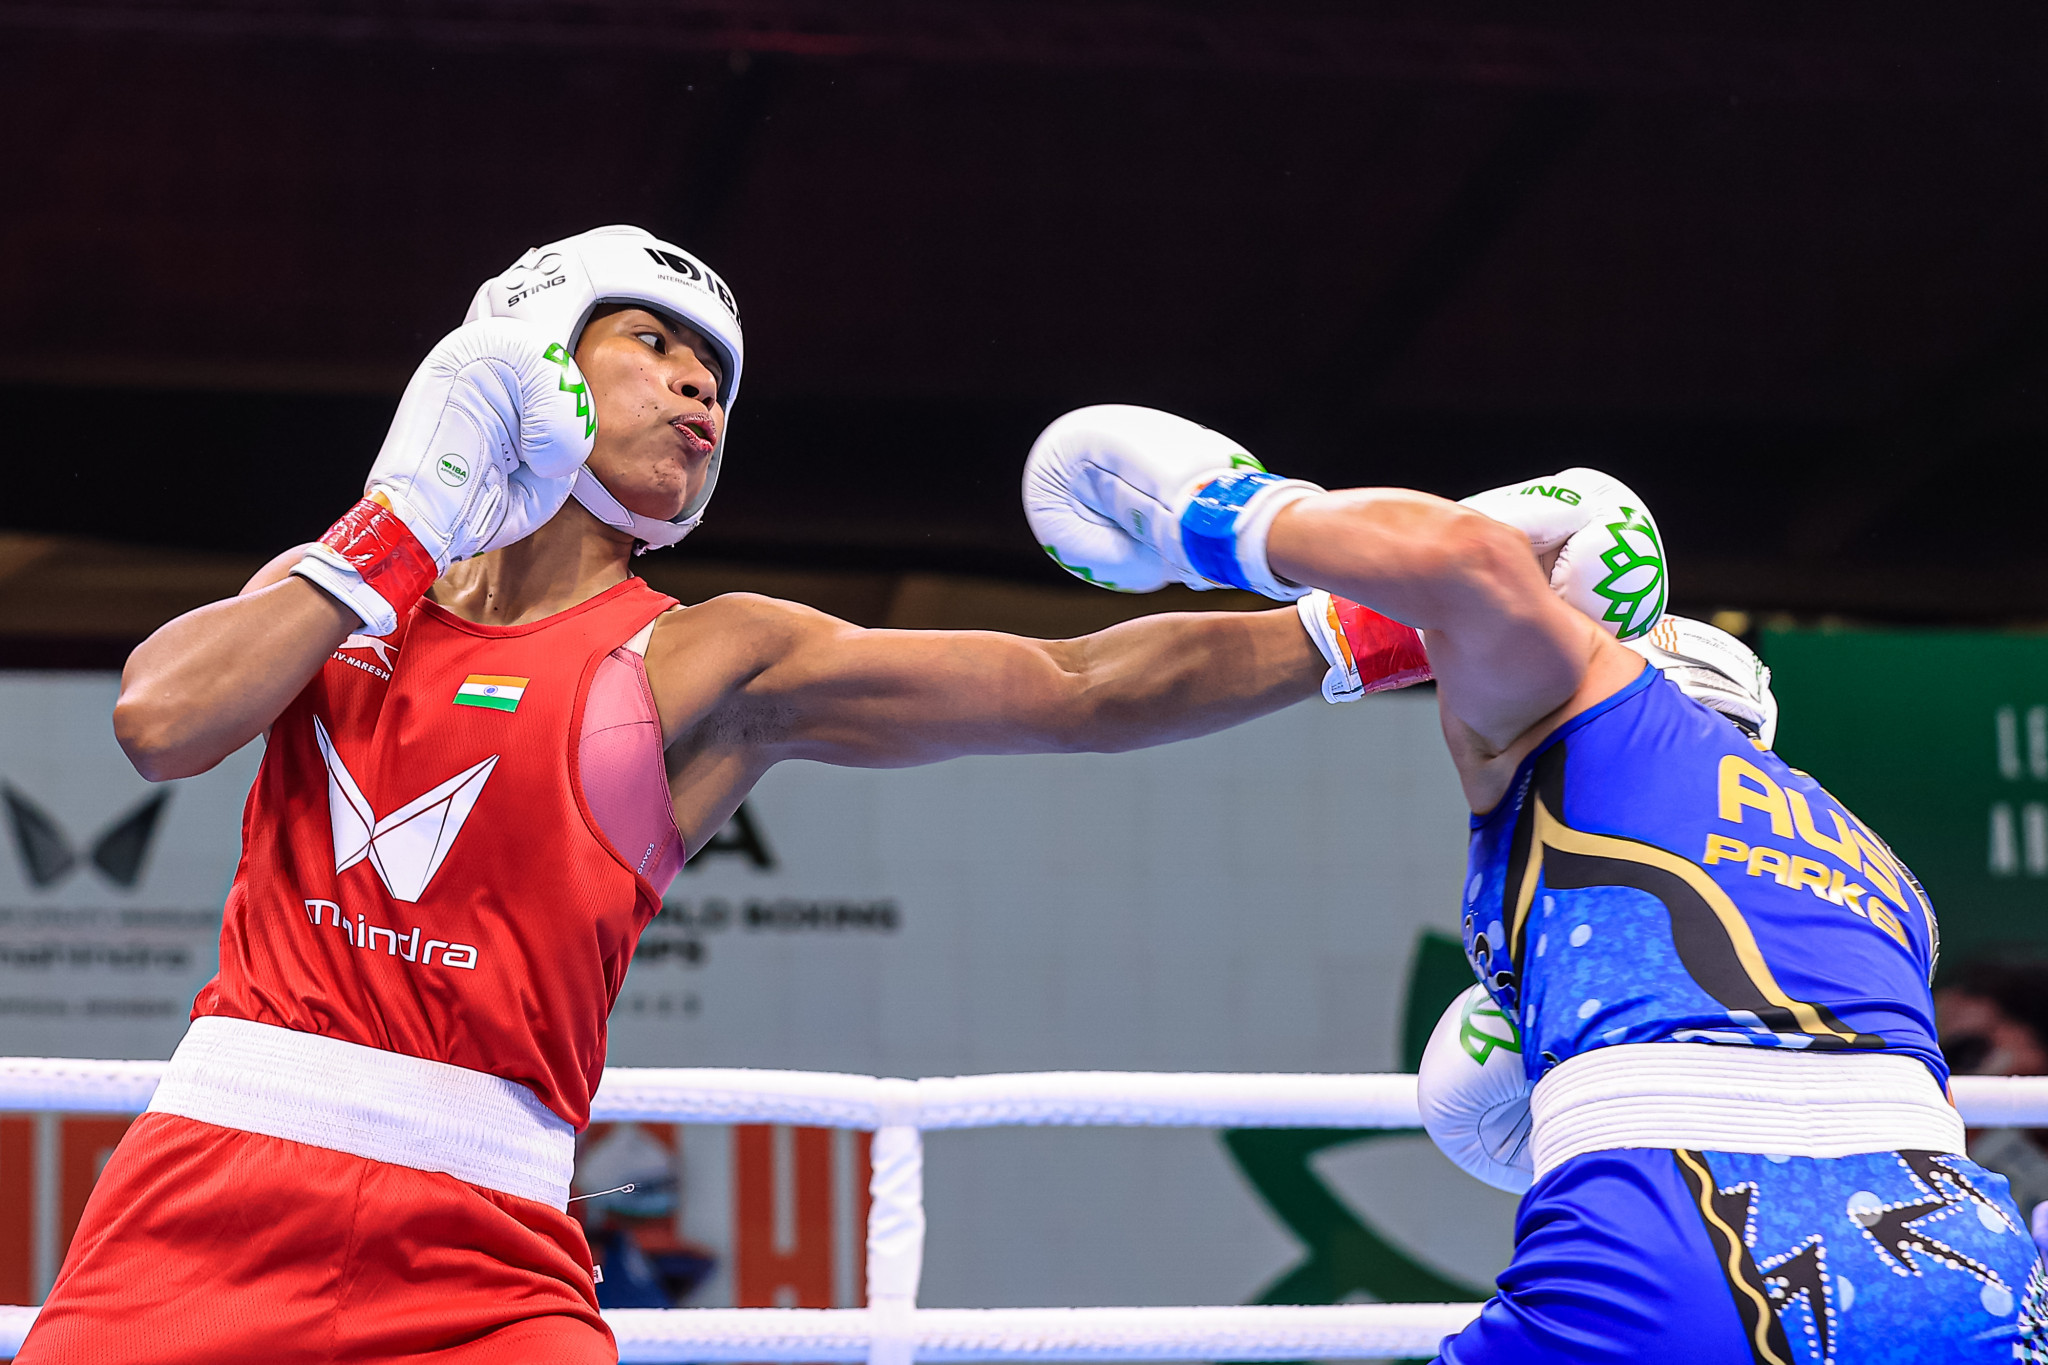 Lovlina Borgohain, left, was under immense pressure as India was dependent on her winning the middleweight gold to take sole control of pole position ©IBA